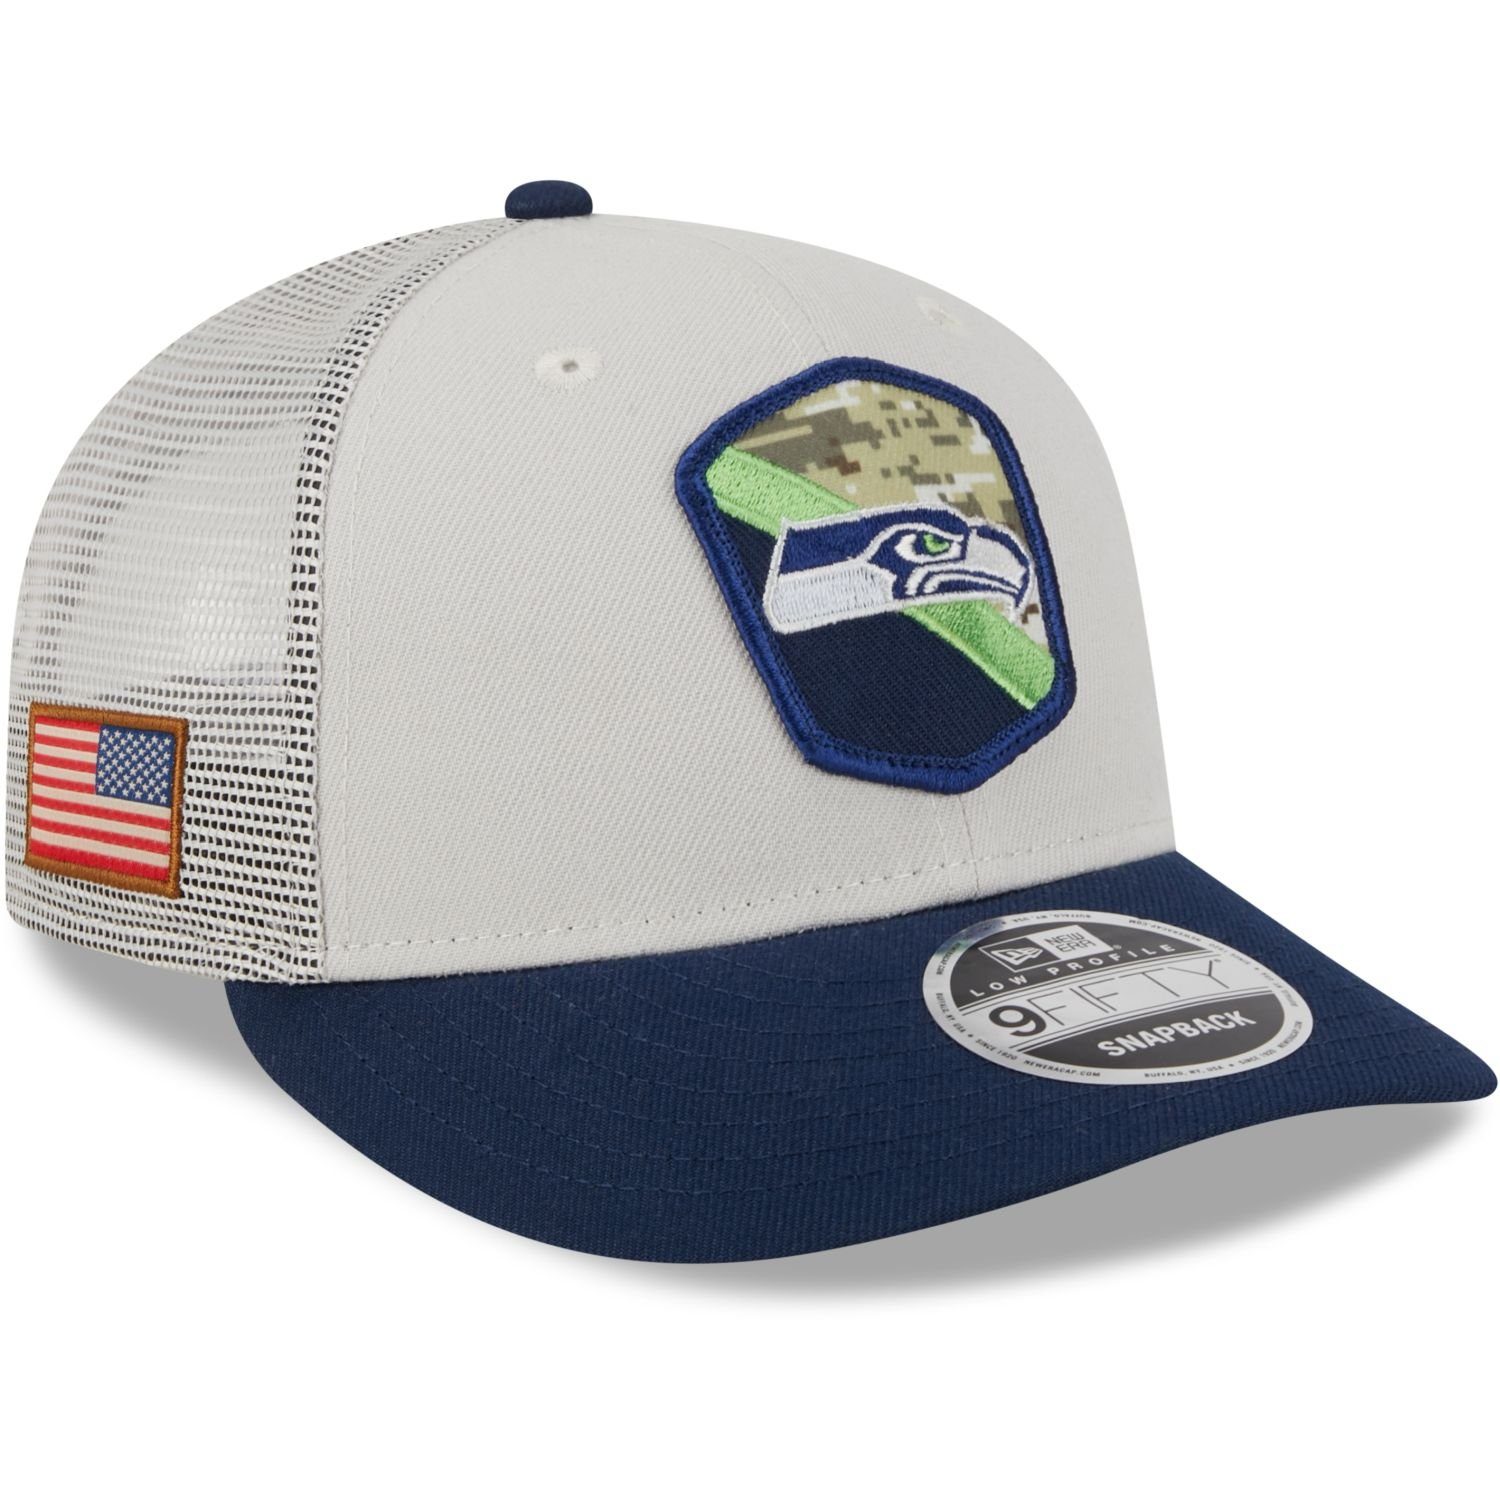 New Era Snapback Cap 9Fifty Low Profile Snap NFL Salute to Service Seattle Seahawks